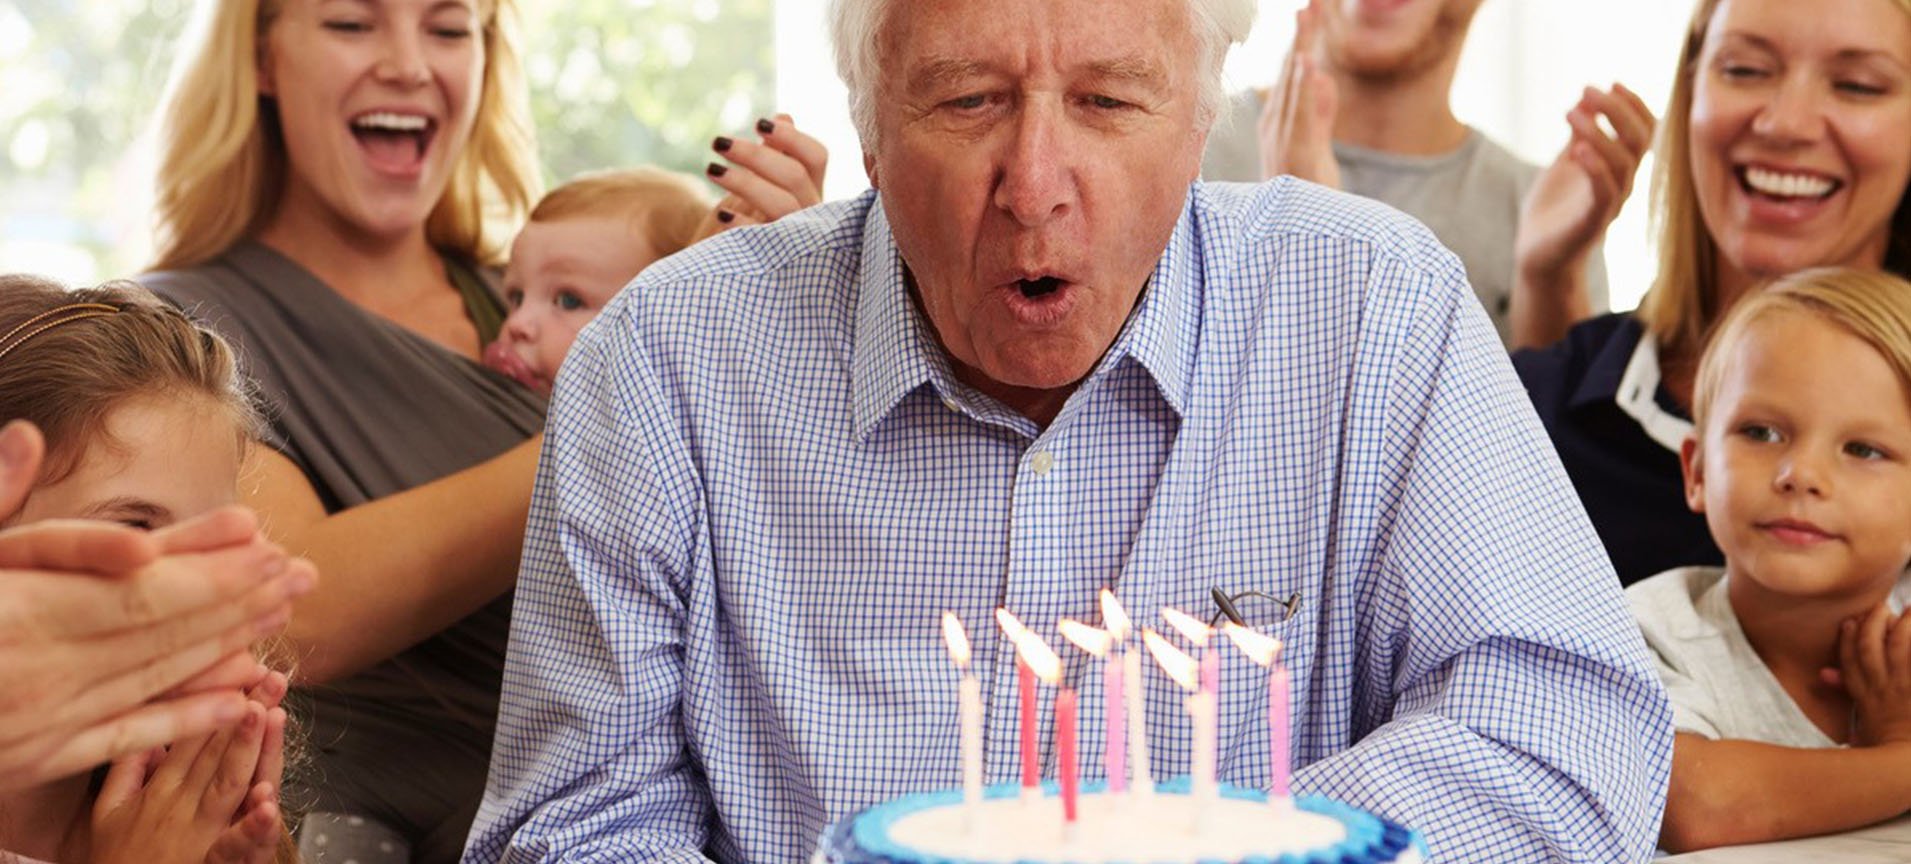 A man blows out the candles on his cake, surrounded by his family.